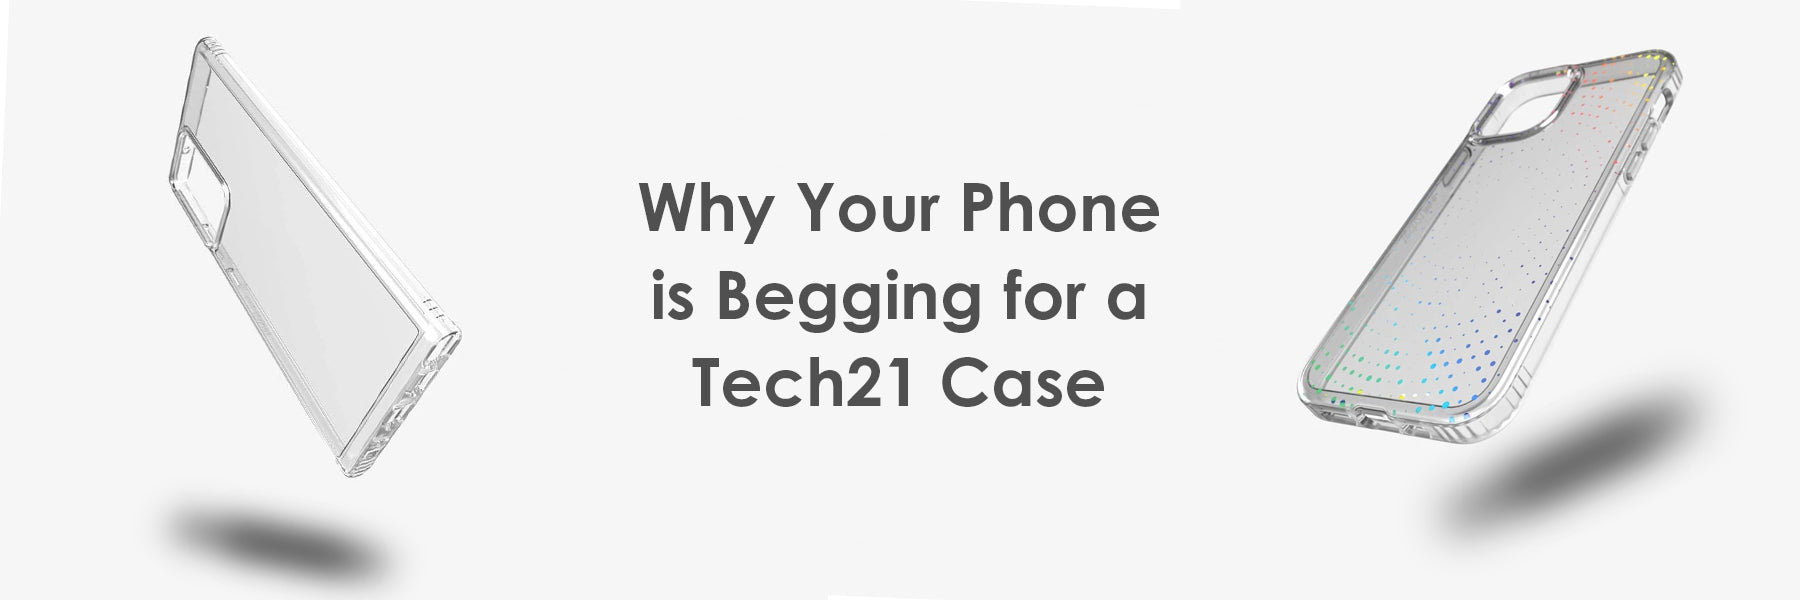 Why Your Phone is Begging for a Tech21 Case